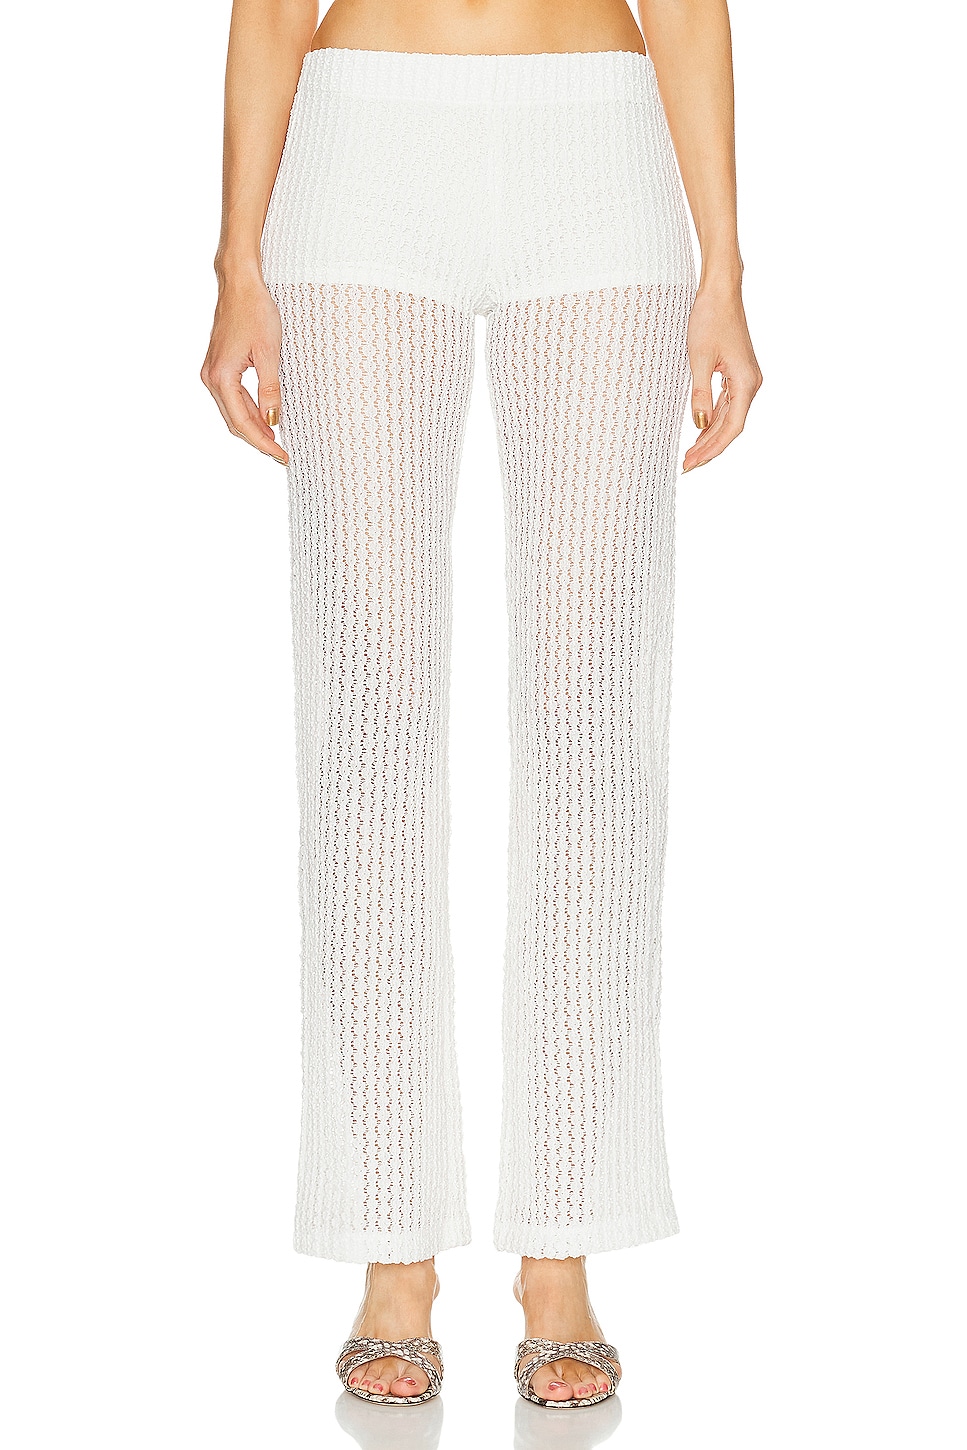 Sely Textured Low Rise Pant in White